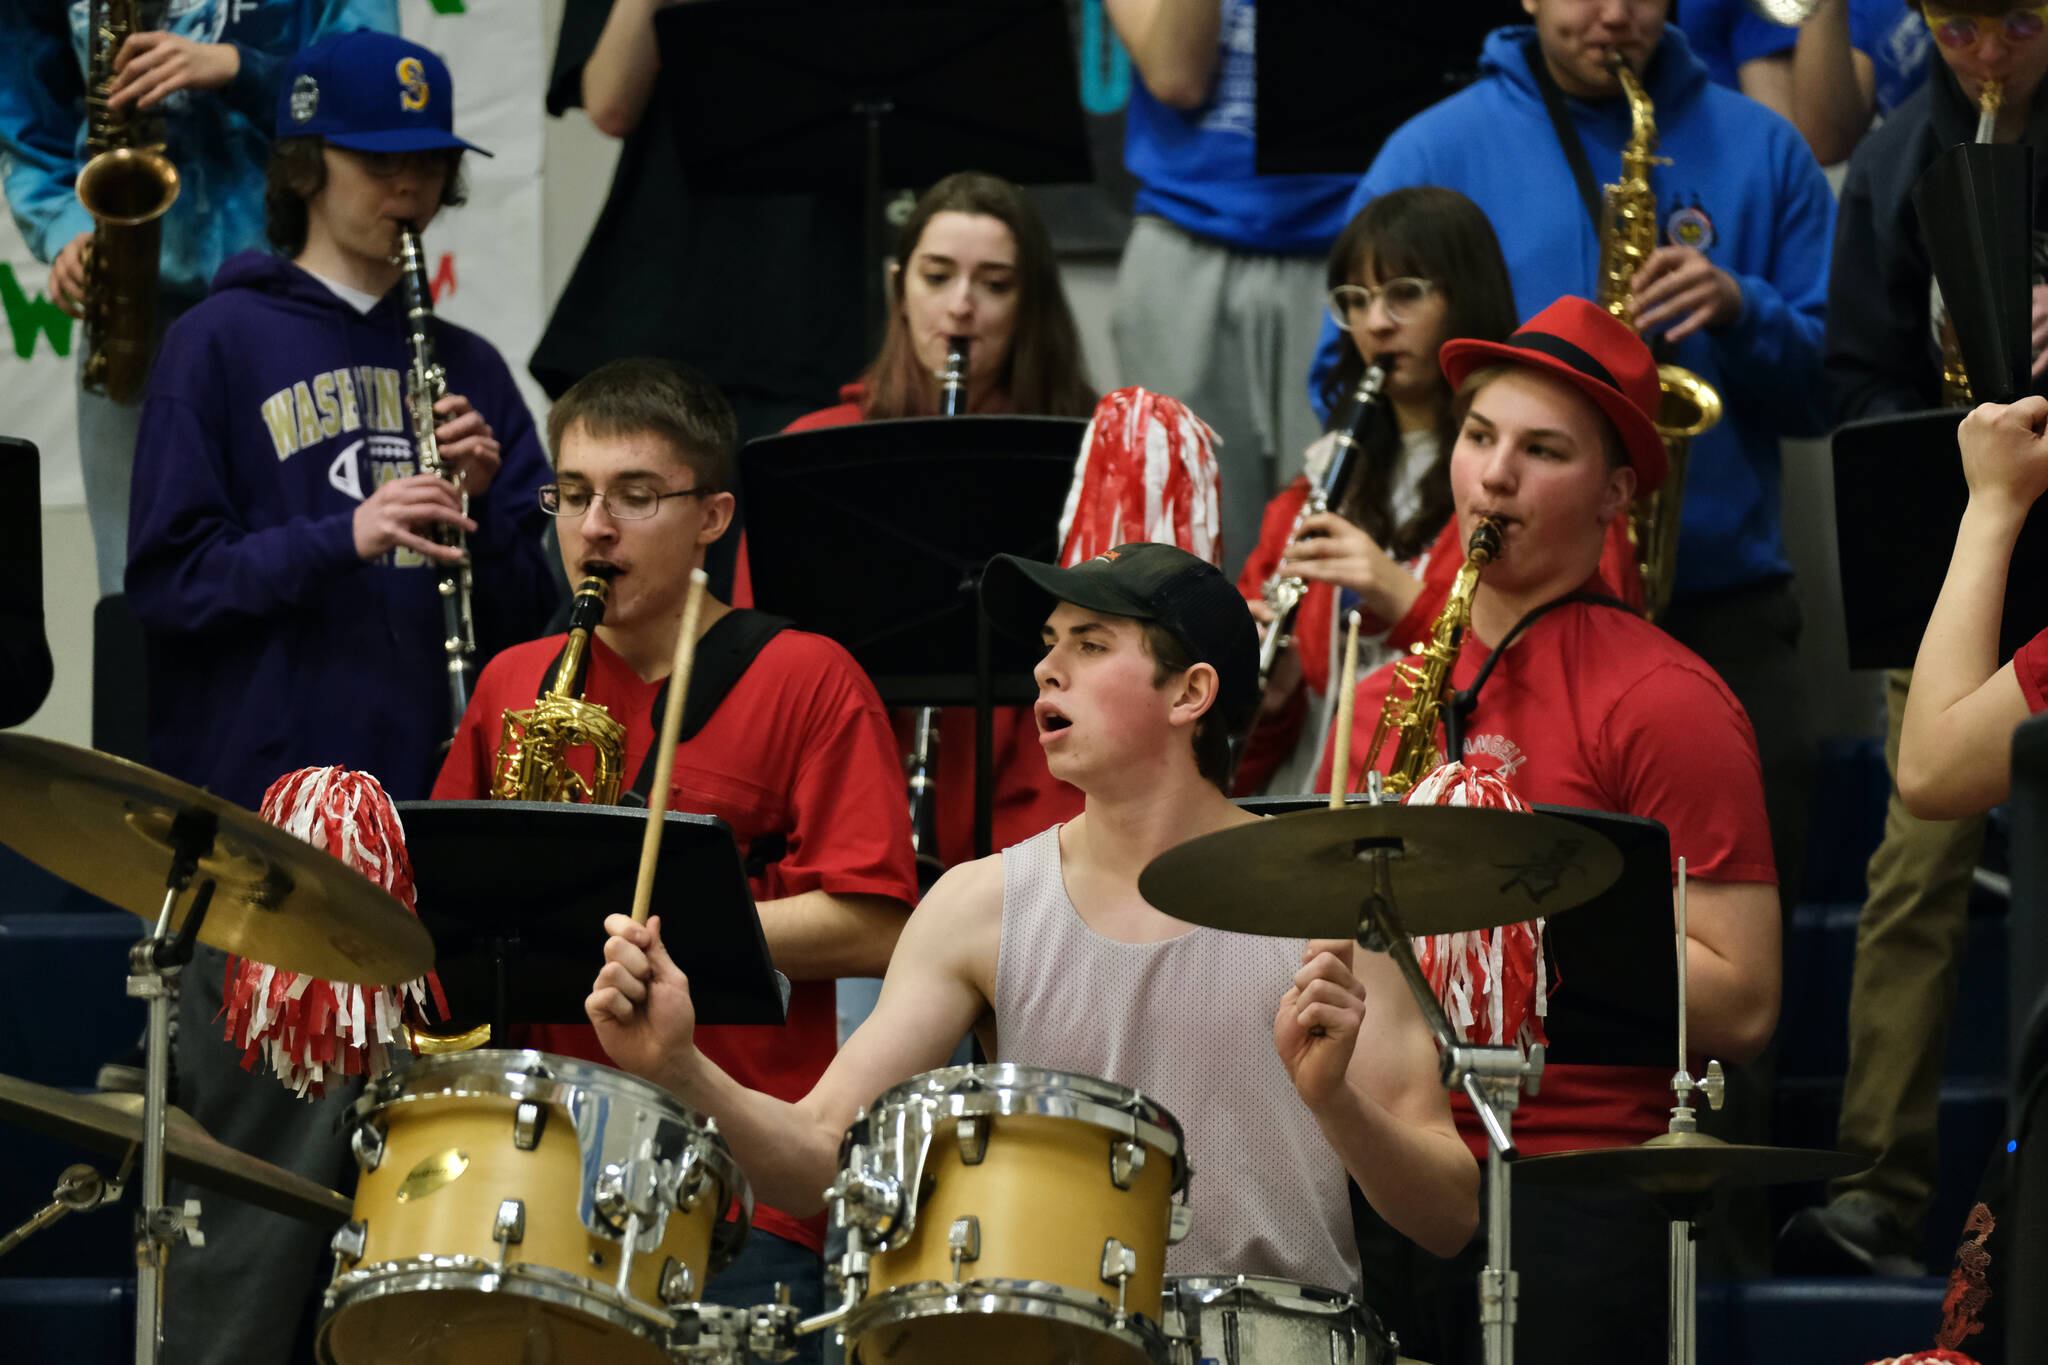 The Wrangell Pep Band plays at the Region V tournament on Wednesday. (Klas Stolpe / For the Juneau Empire)